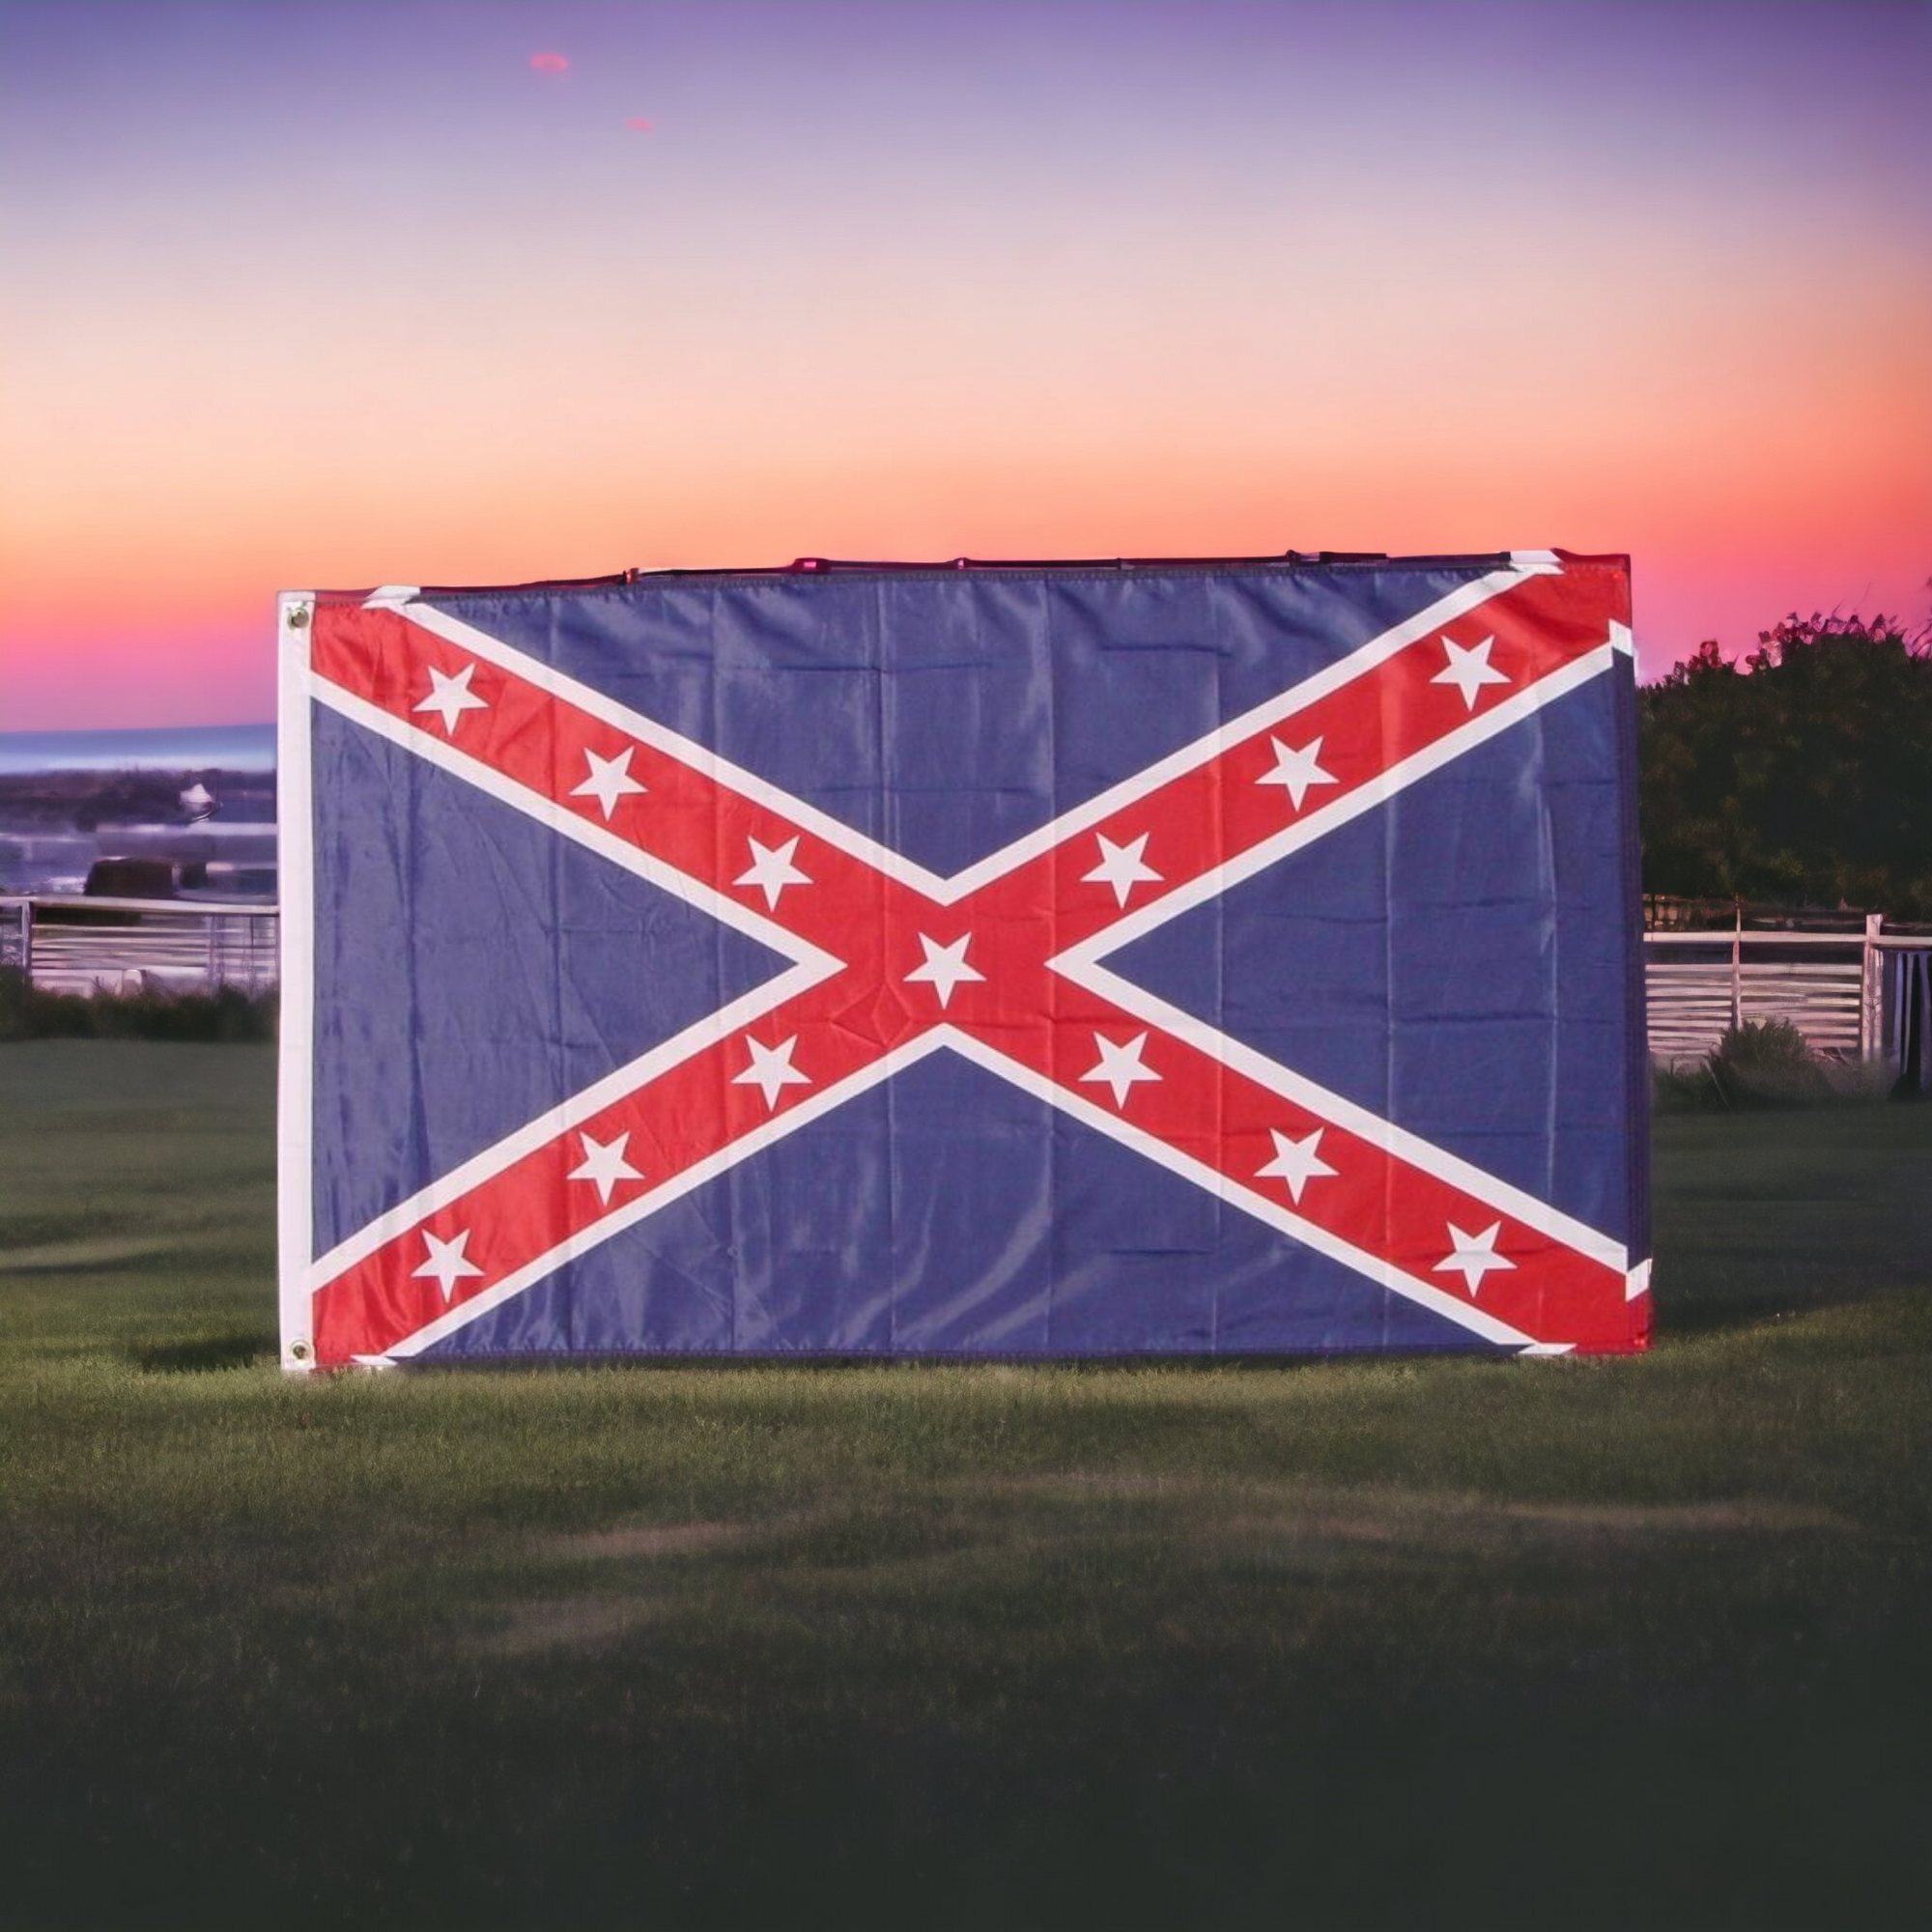 Army of Trans Mississippi Flag